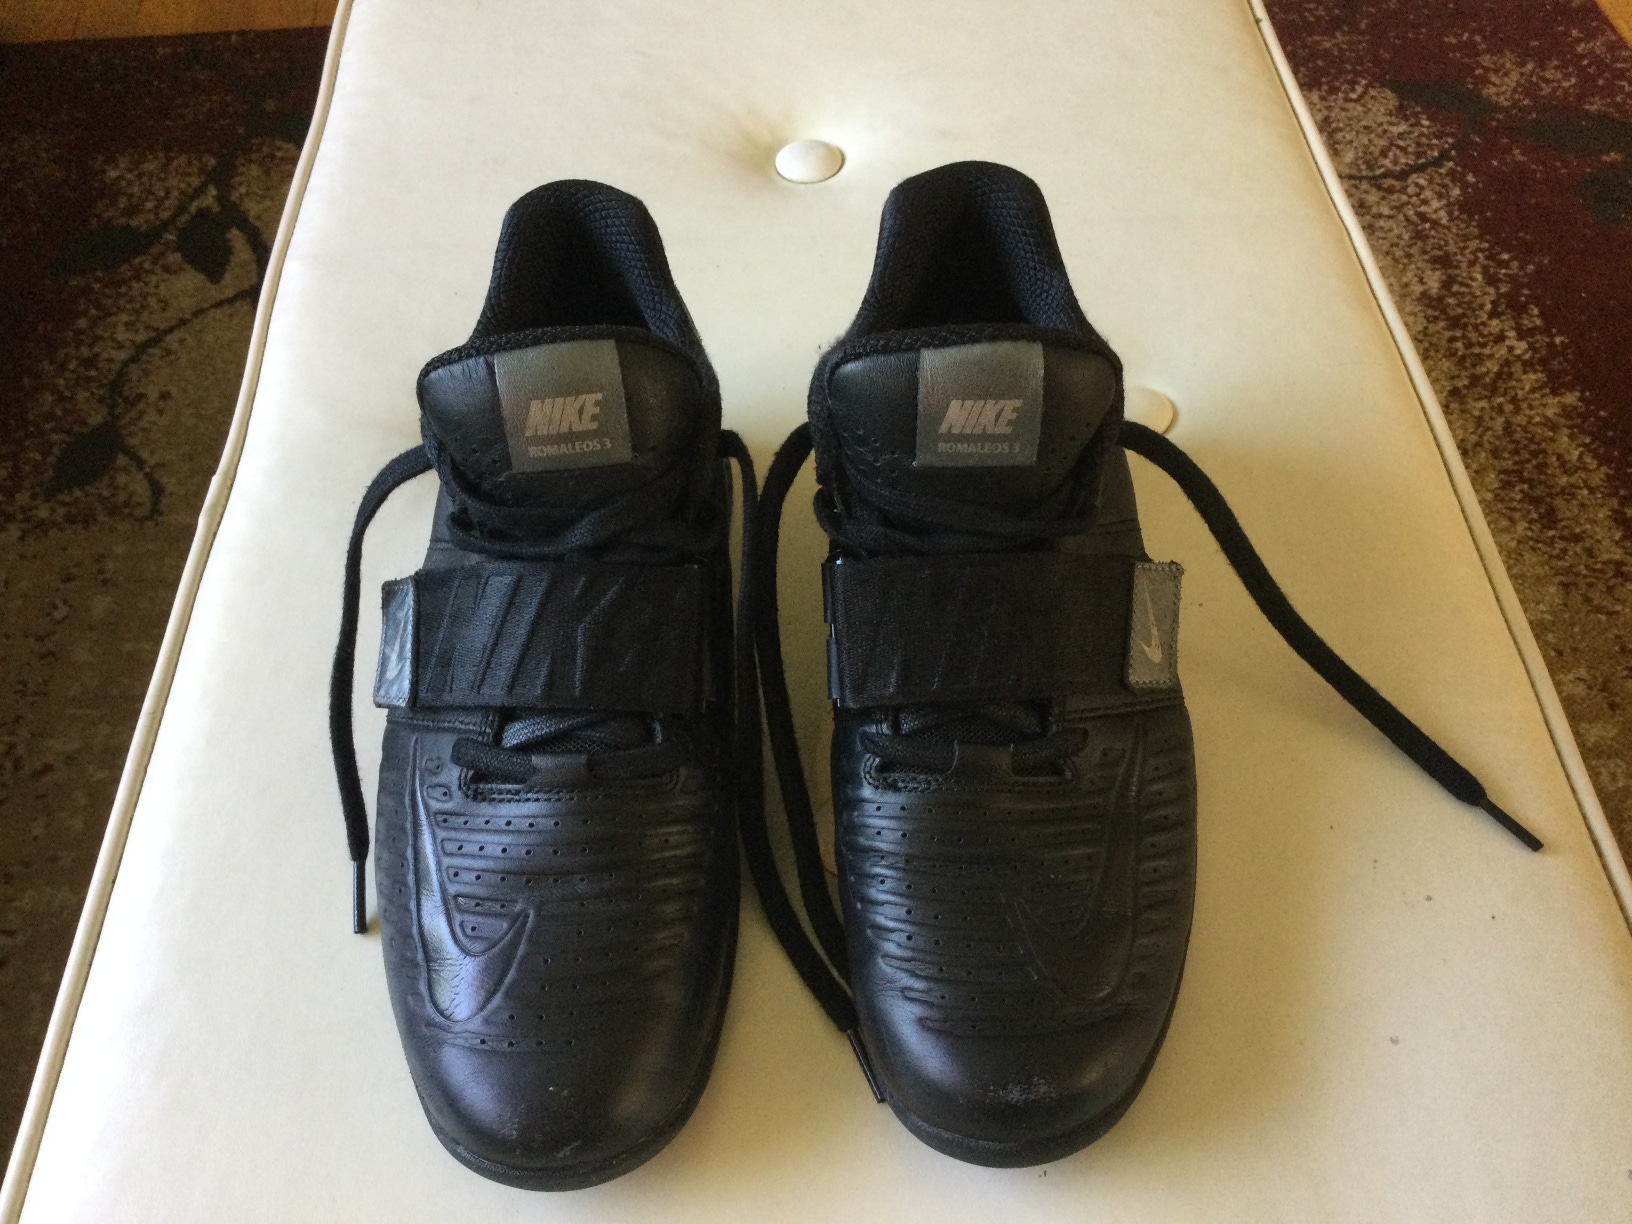 Black Adult Used Size 9.0 (Women's 10) Nike Shoes